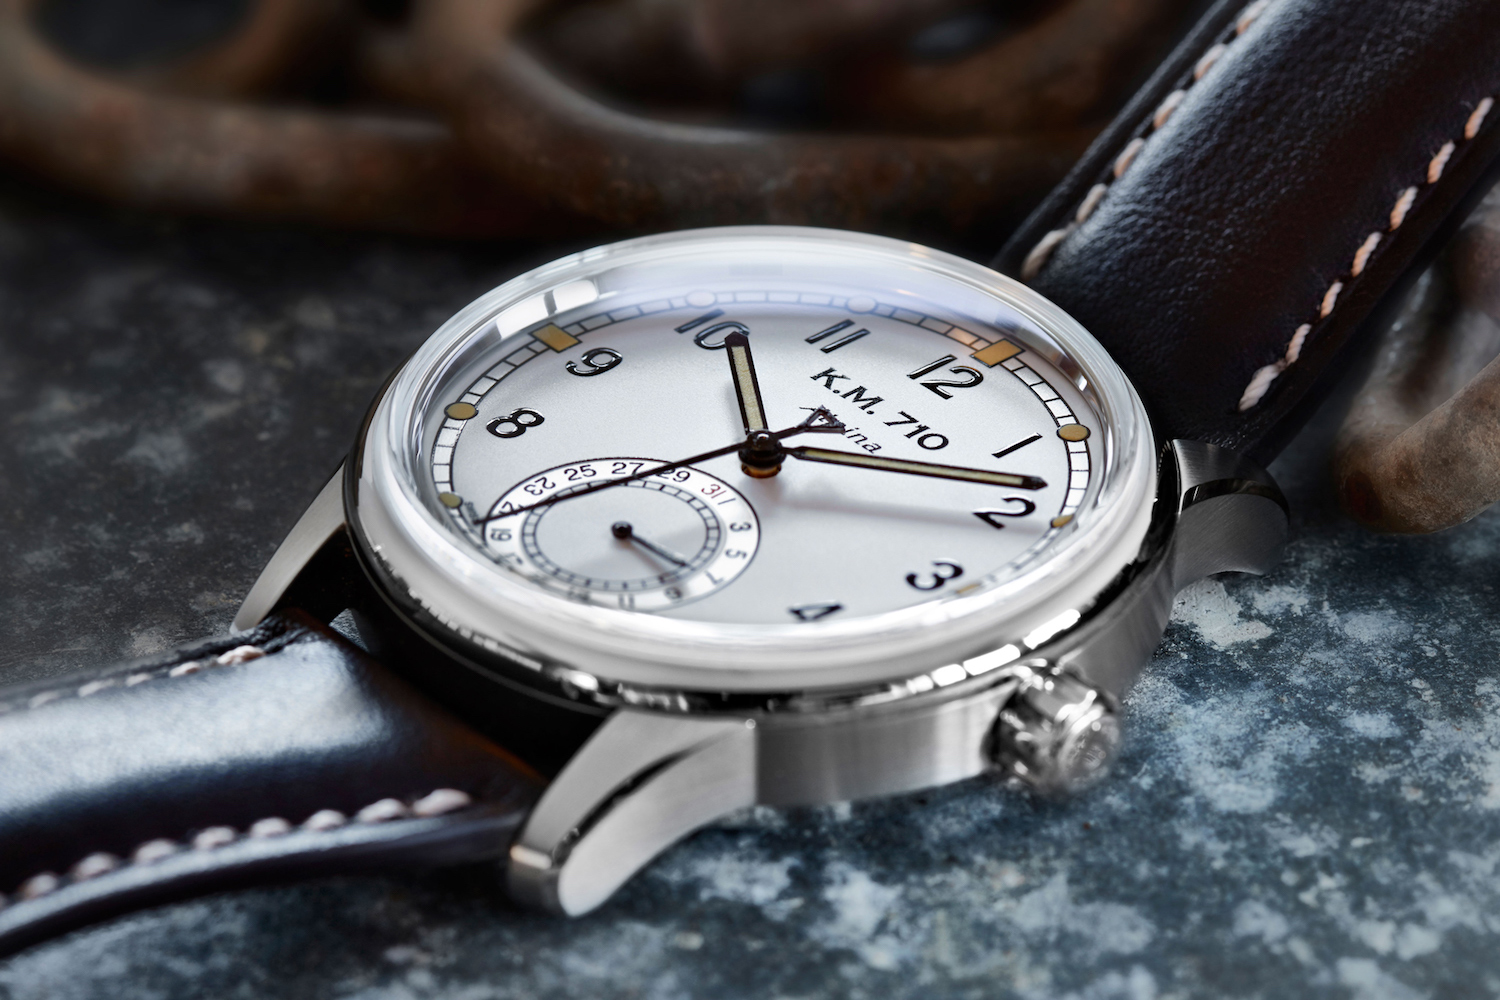 Alpina-KM-710-Military-WWII-inspired-Ger